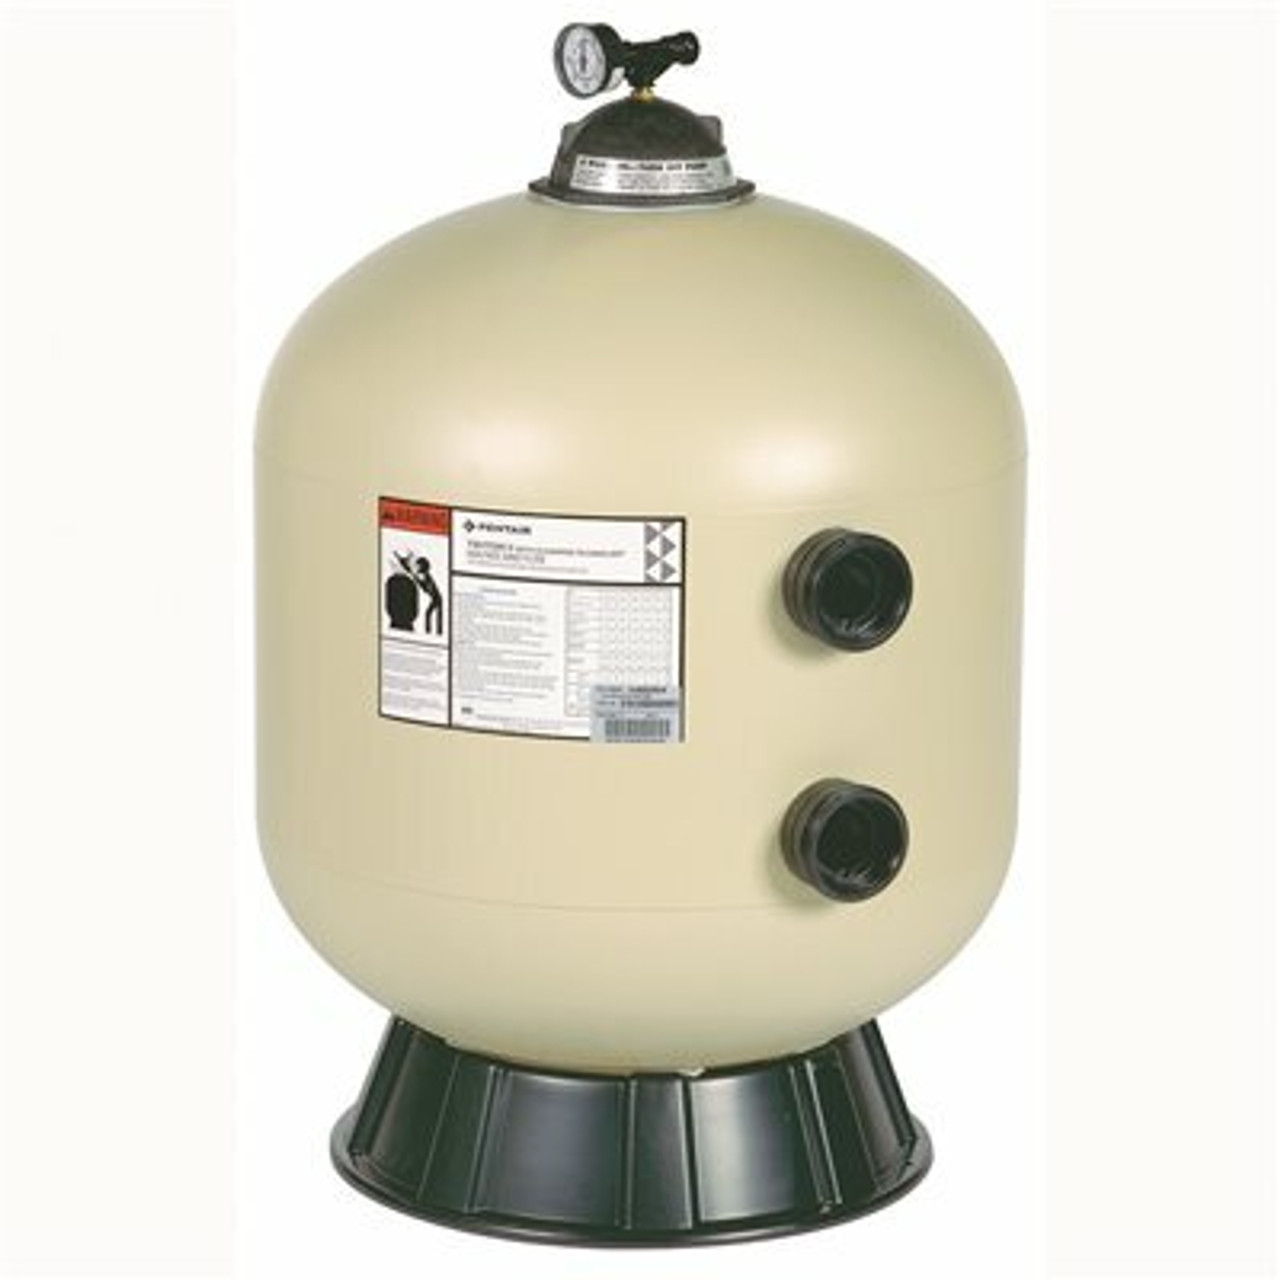 Tr100 30 In. Side Mount Fiberglass Sand Filter Without Valve, Triton Ii, Almond